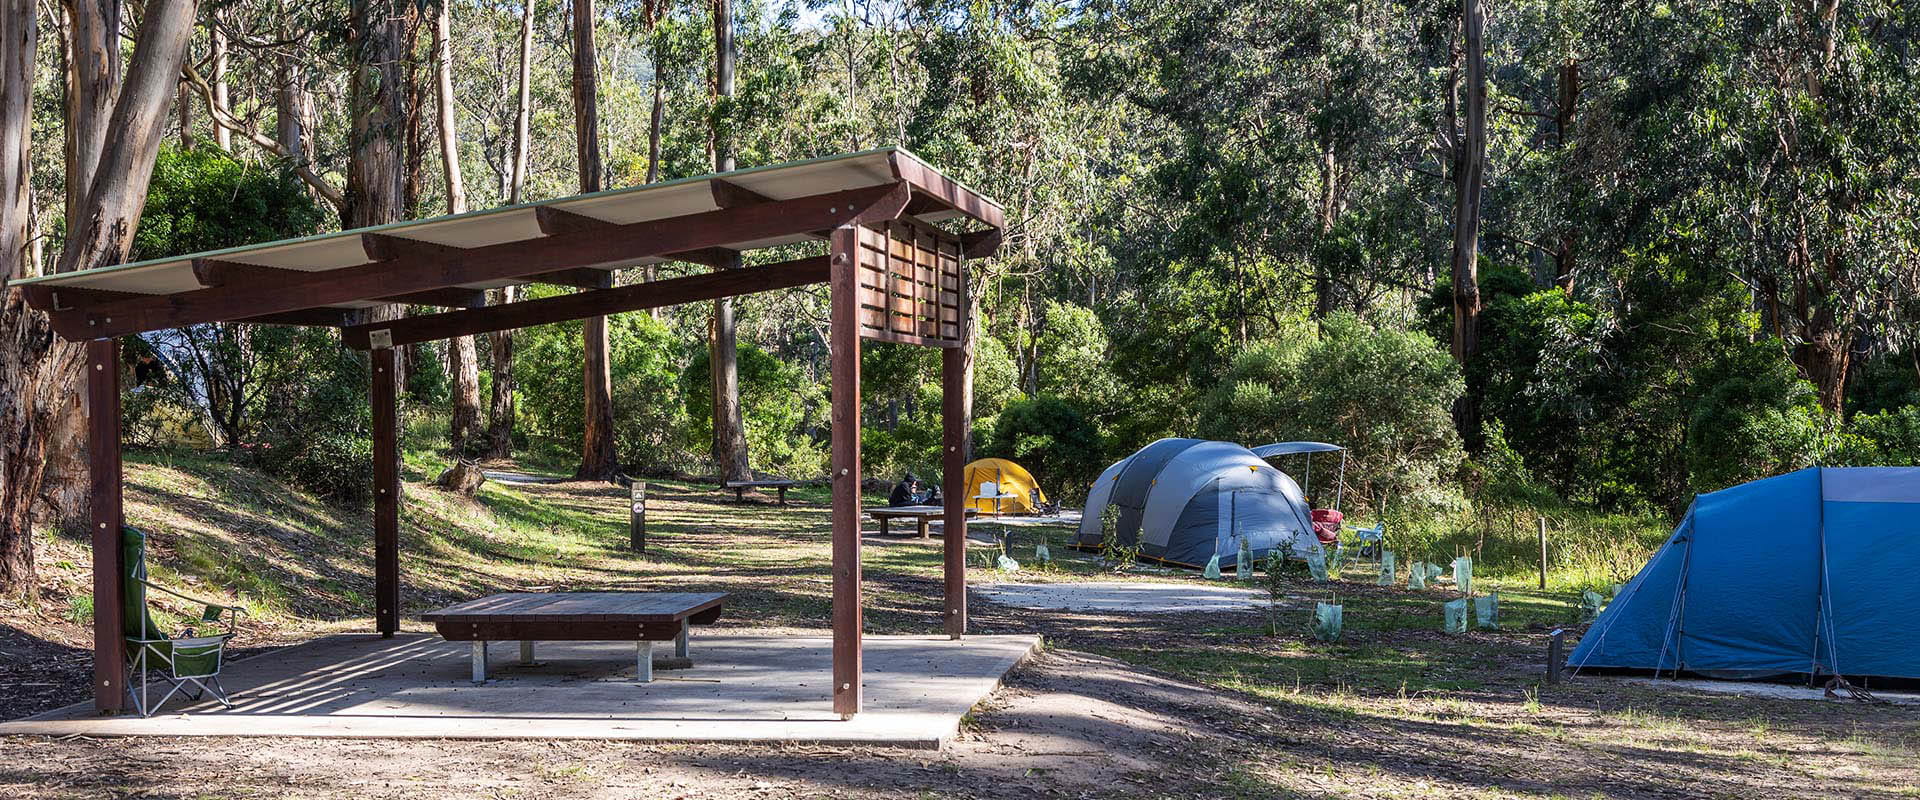 A wooden shelter in a clearing in front of three tents surrounded by tall eucalypt trees